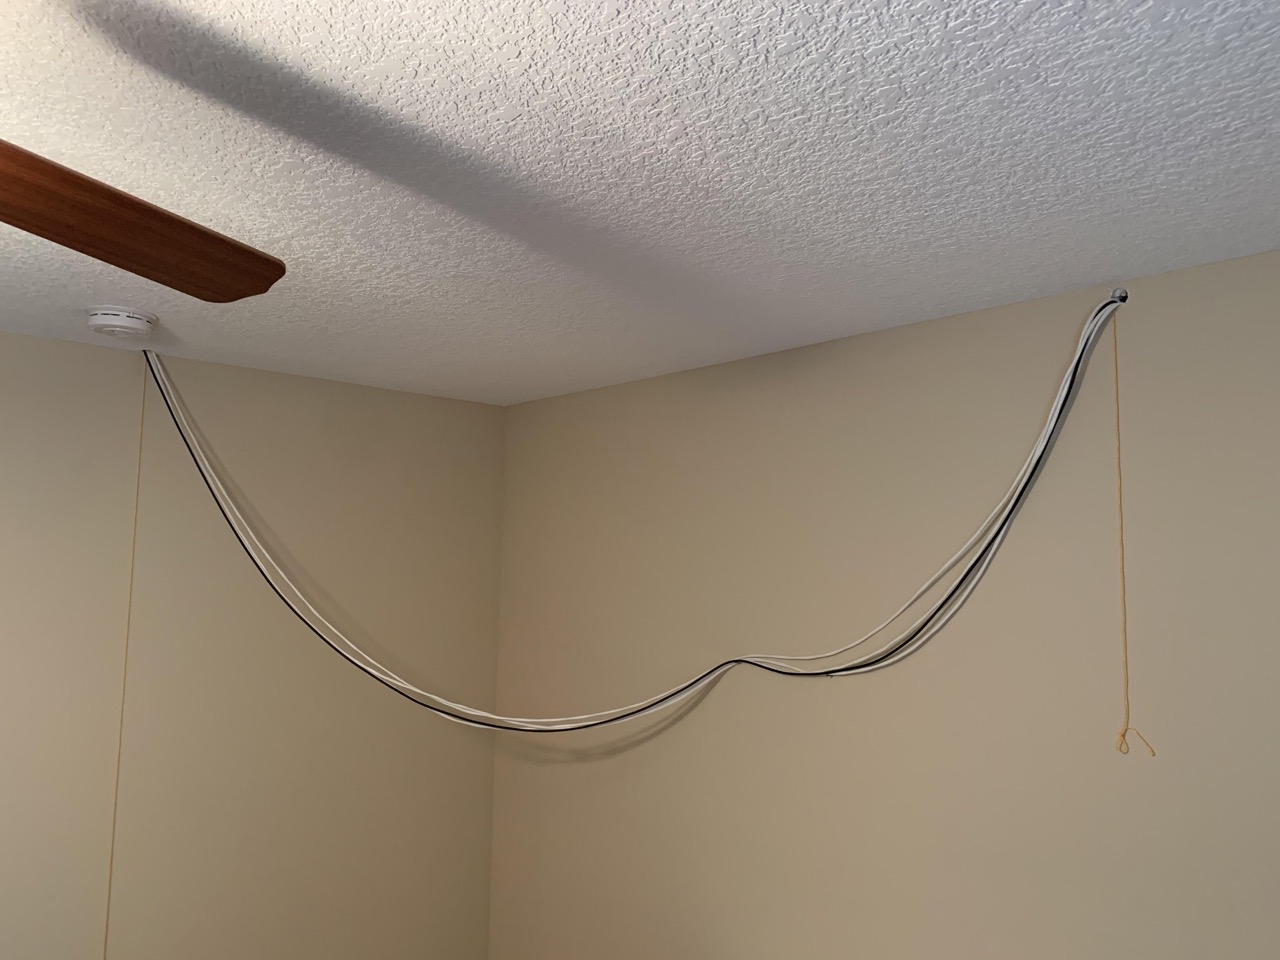 https://storables.com/wp-content/uploads/2023/10/how-to-hide-electrical-wires-on-ceiling-1696339803.jpeg